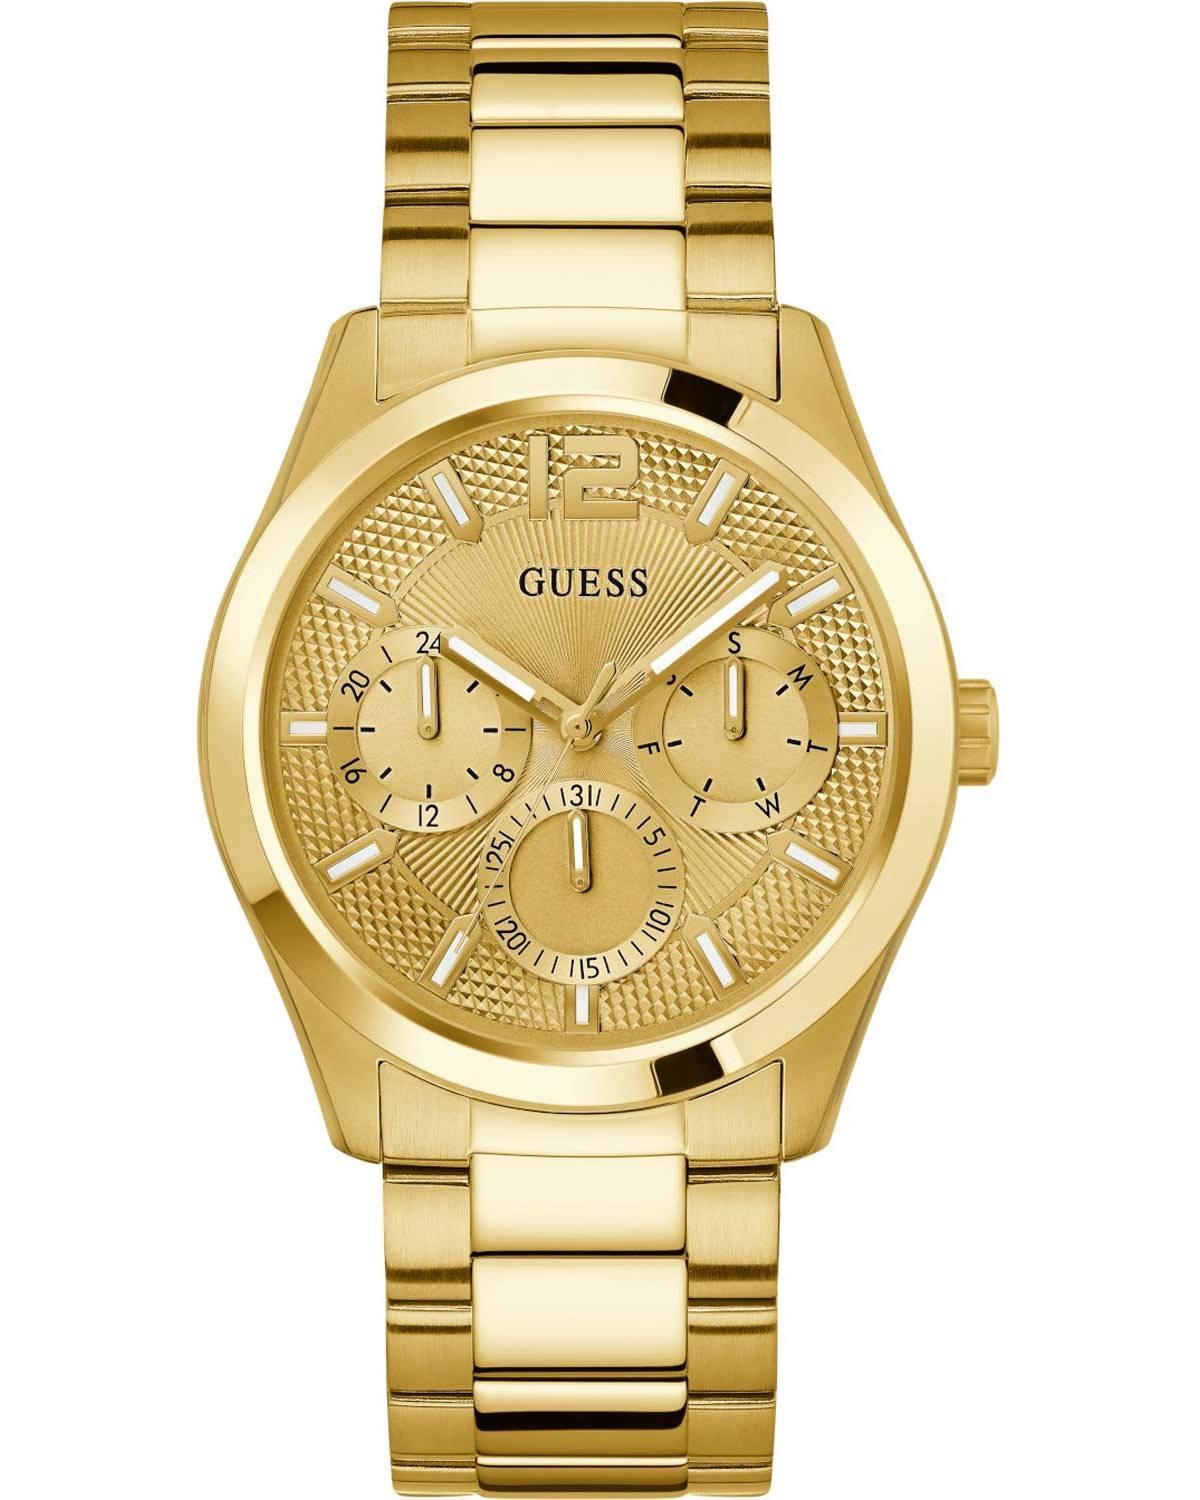 GUESS Zen - GW0707G3, Gold case with Stainless Steel Bracelet